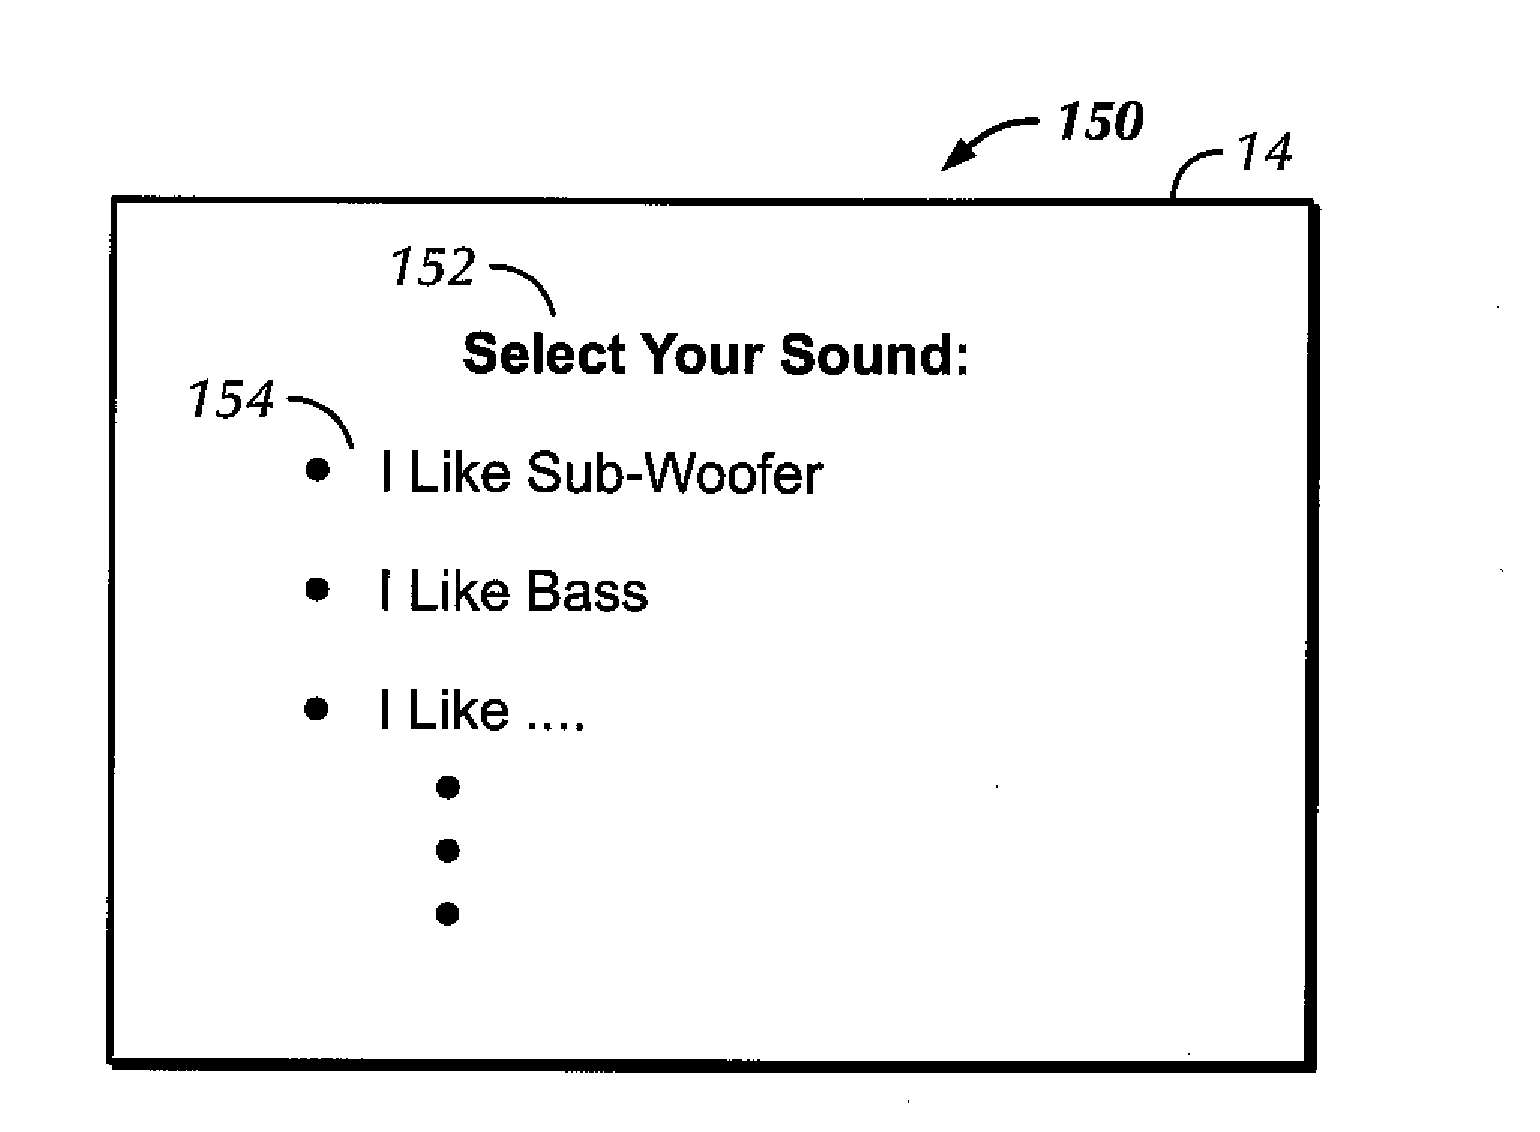 Distributed wireless speaker system with automatic configuration determination when new speakers are added